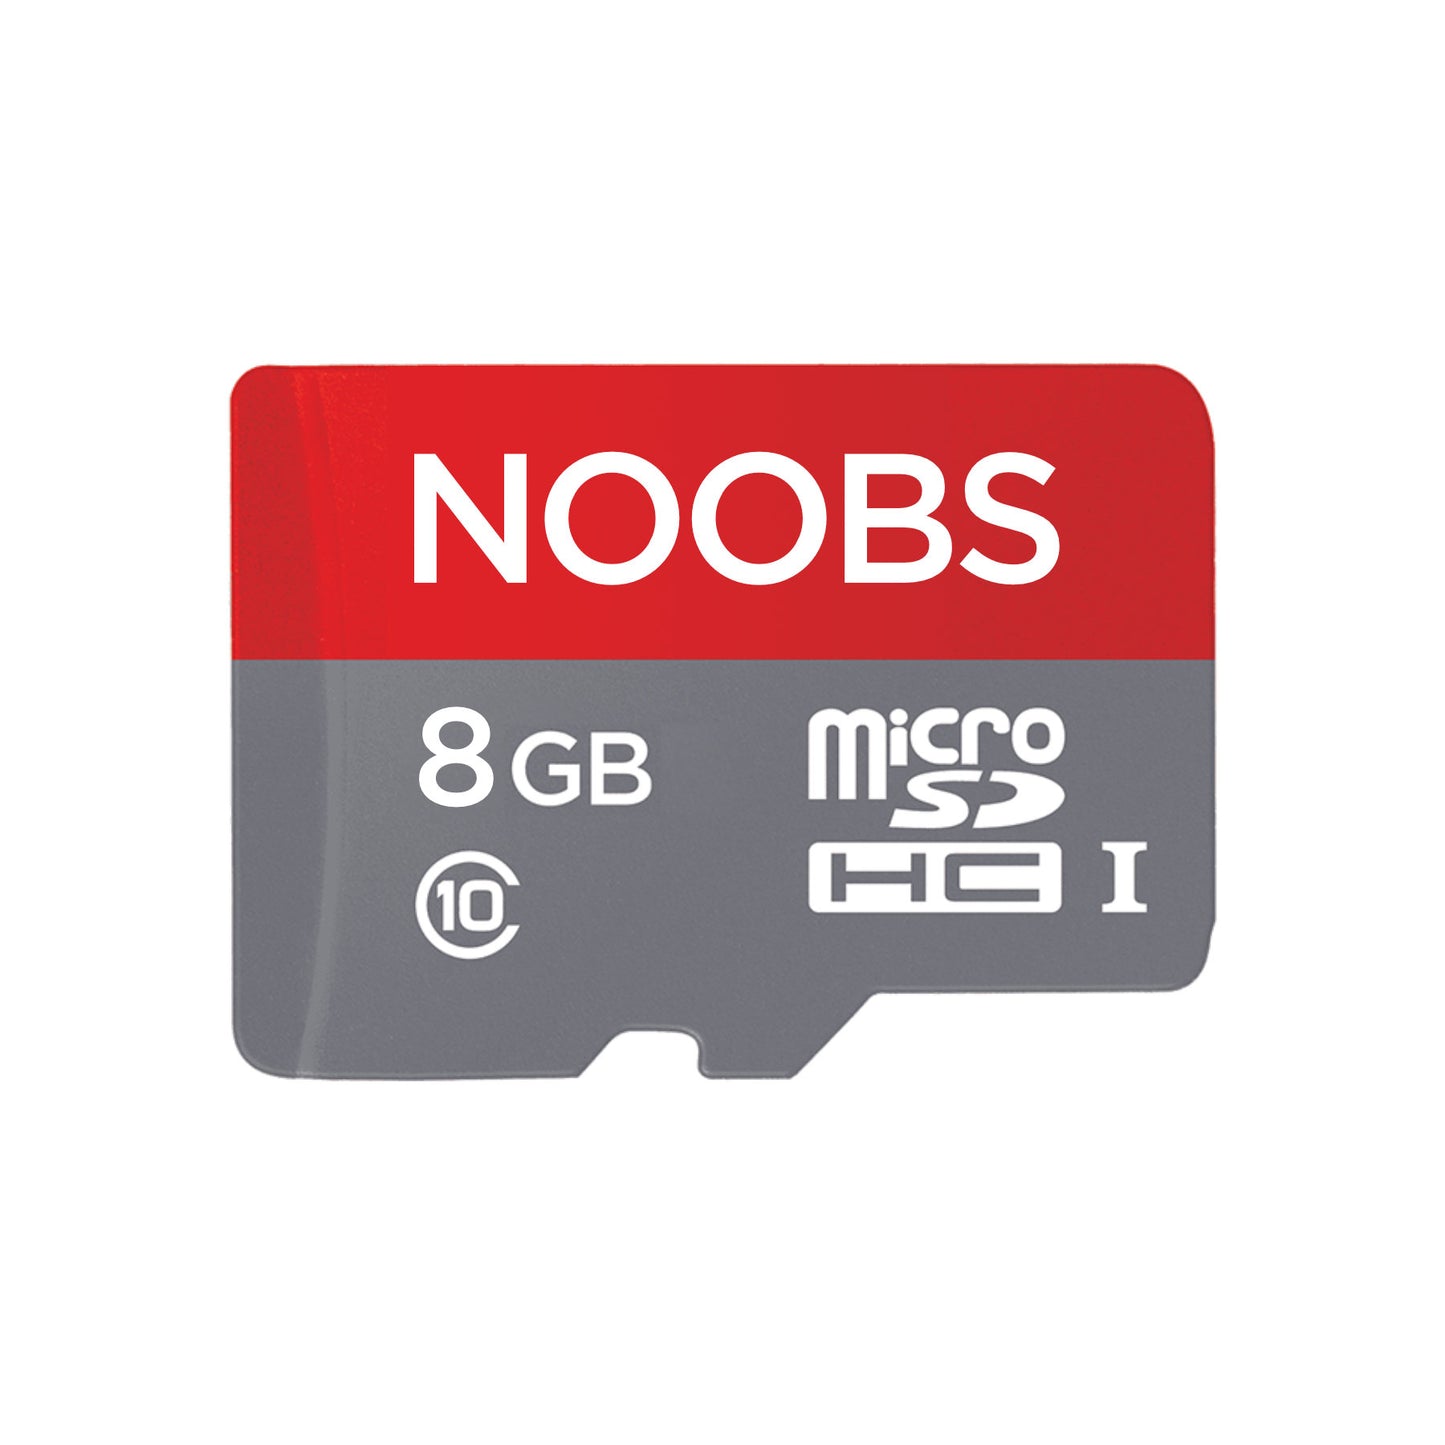 microSD card with NOOBS